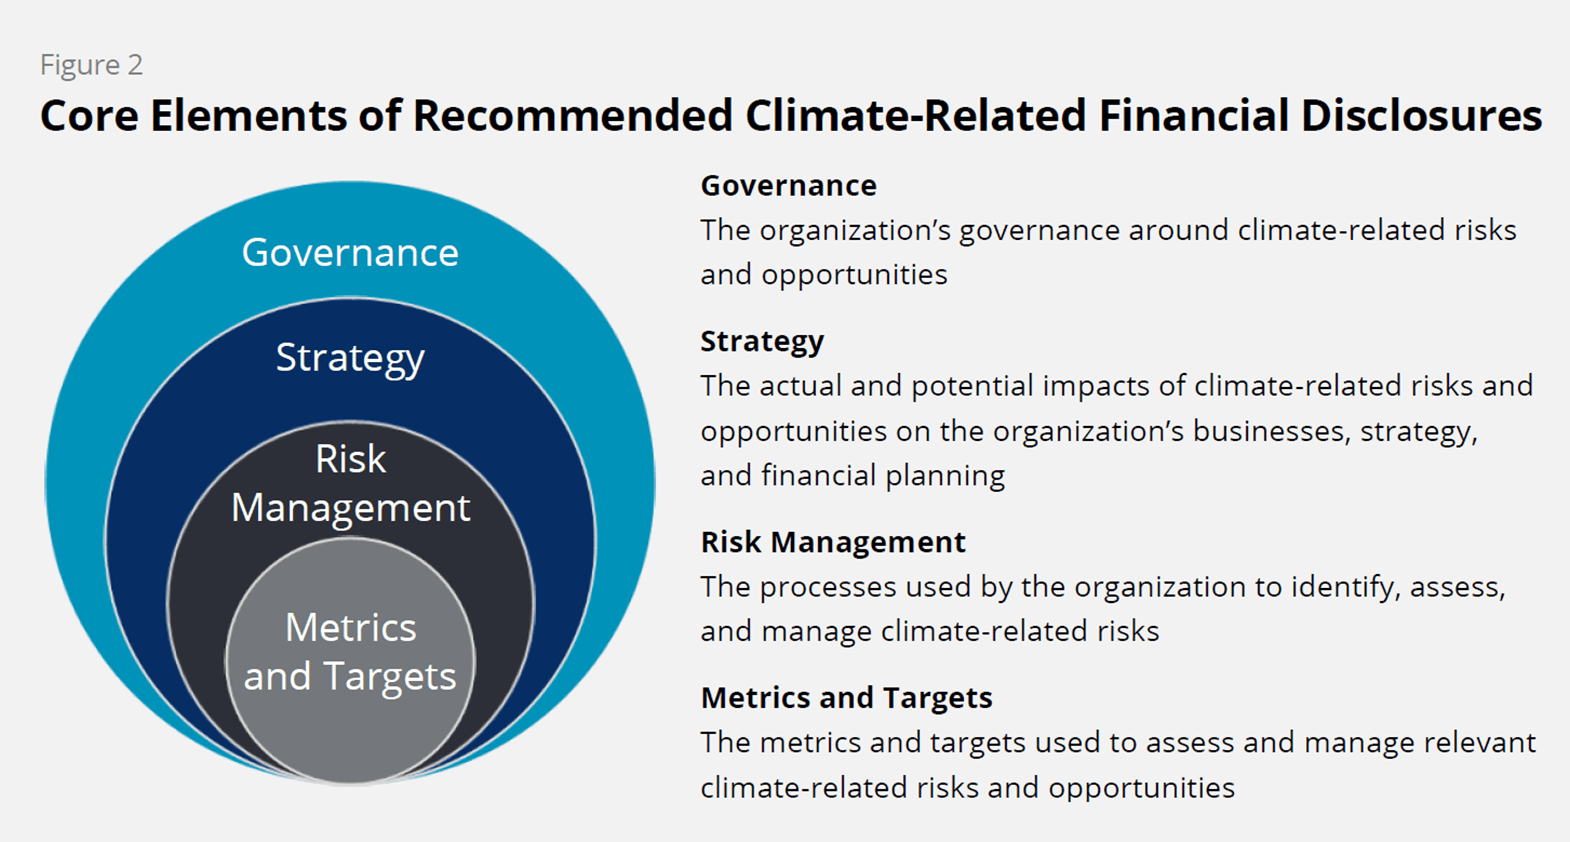 Graphic showing core elements of recommended climate-related financial disclosures including gavernance, strategy, risk-management and metrics and targets